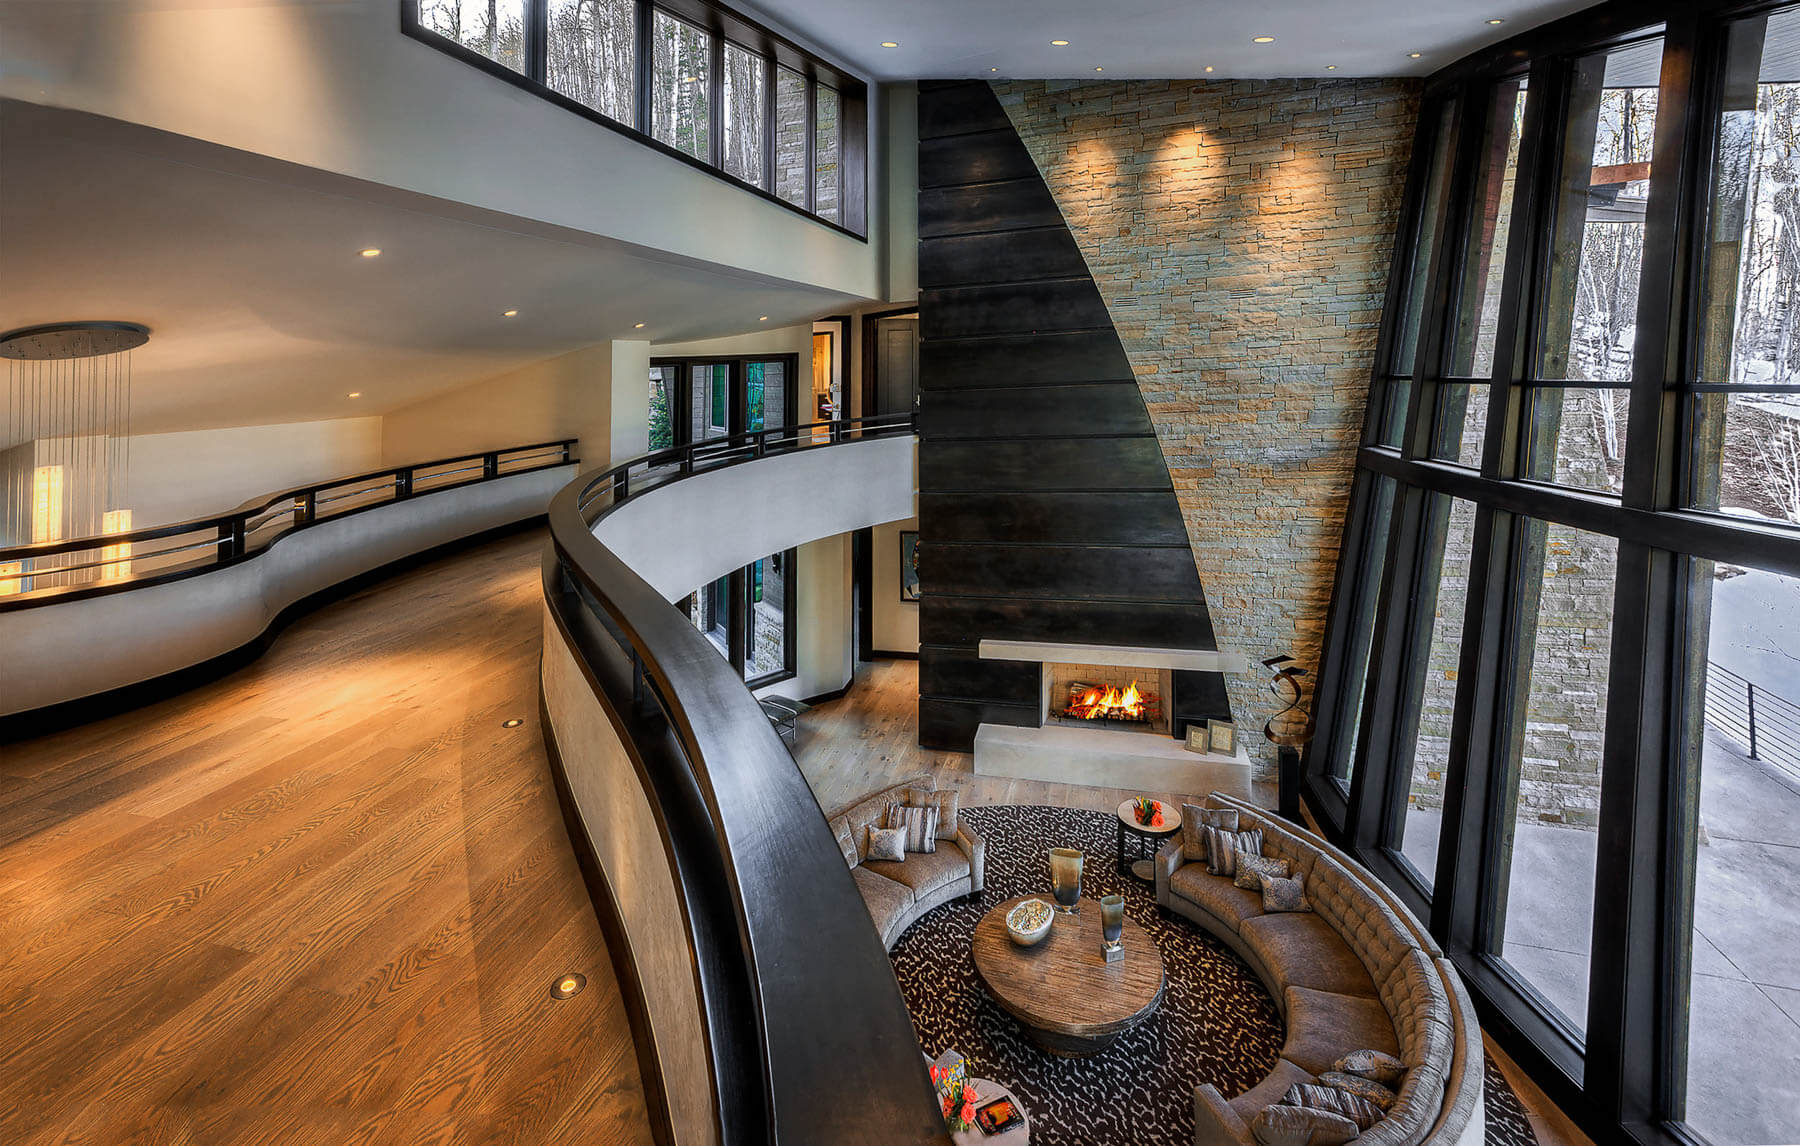 20150403-Bennett-Main-House-3501-09_LV-RM-to-fireplace-from-Balcony-No-Layers